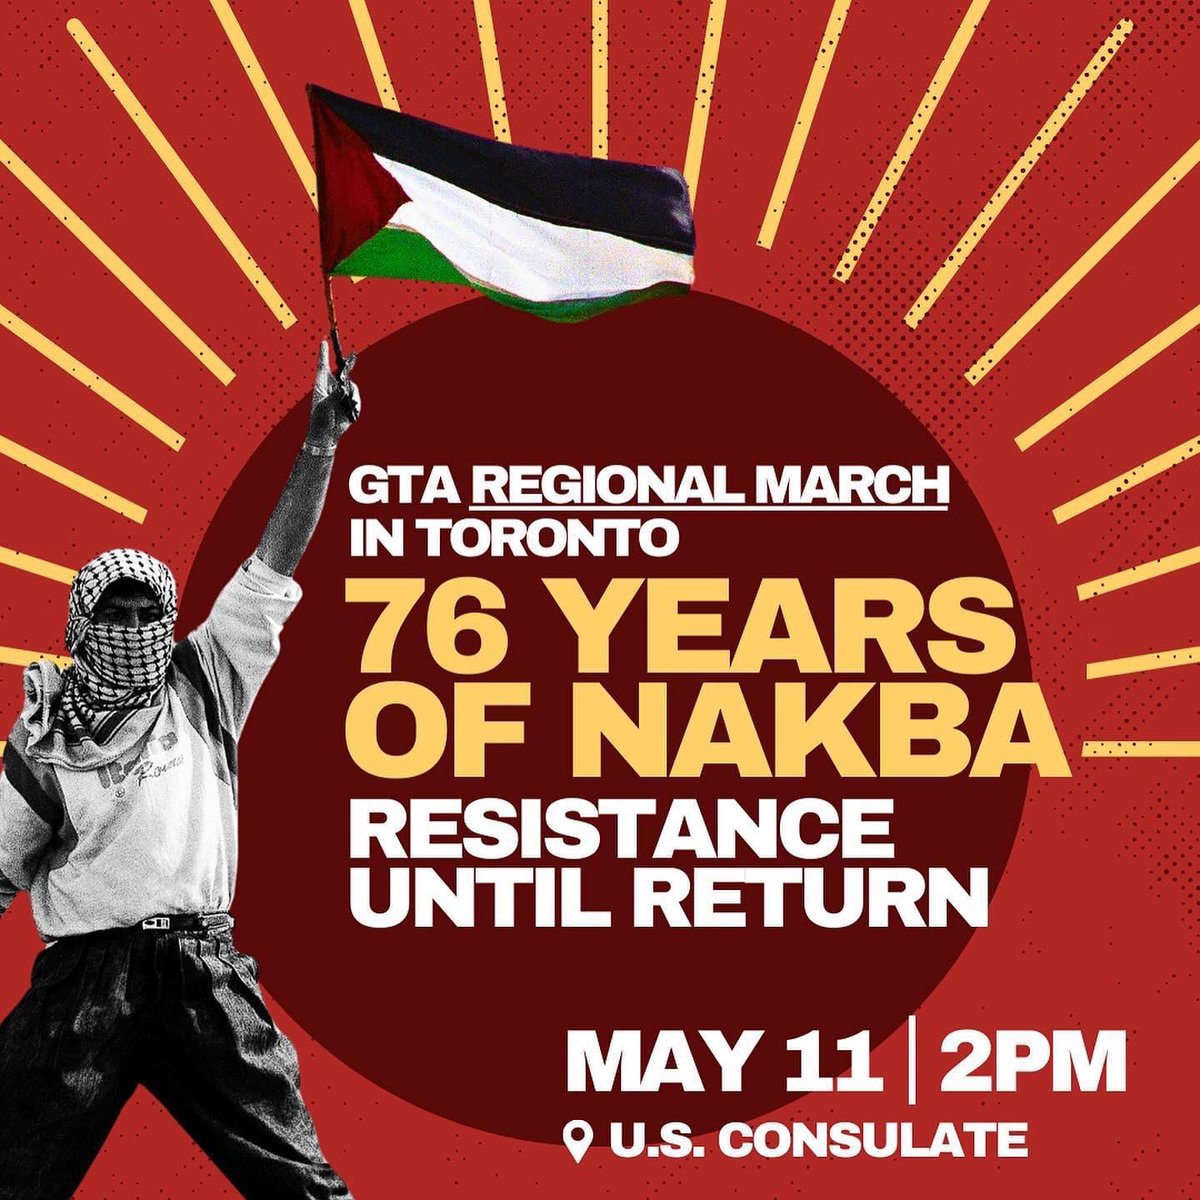 Today at 2pm Nakba day rally with @palyouthmvmt @Toronto4P and so many endorsers.